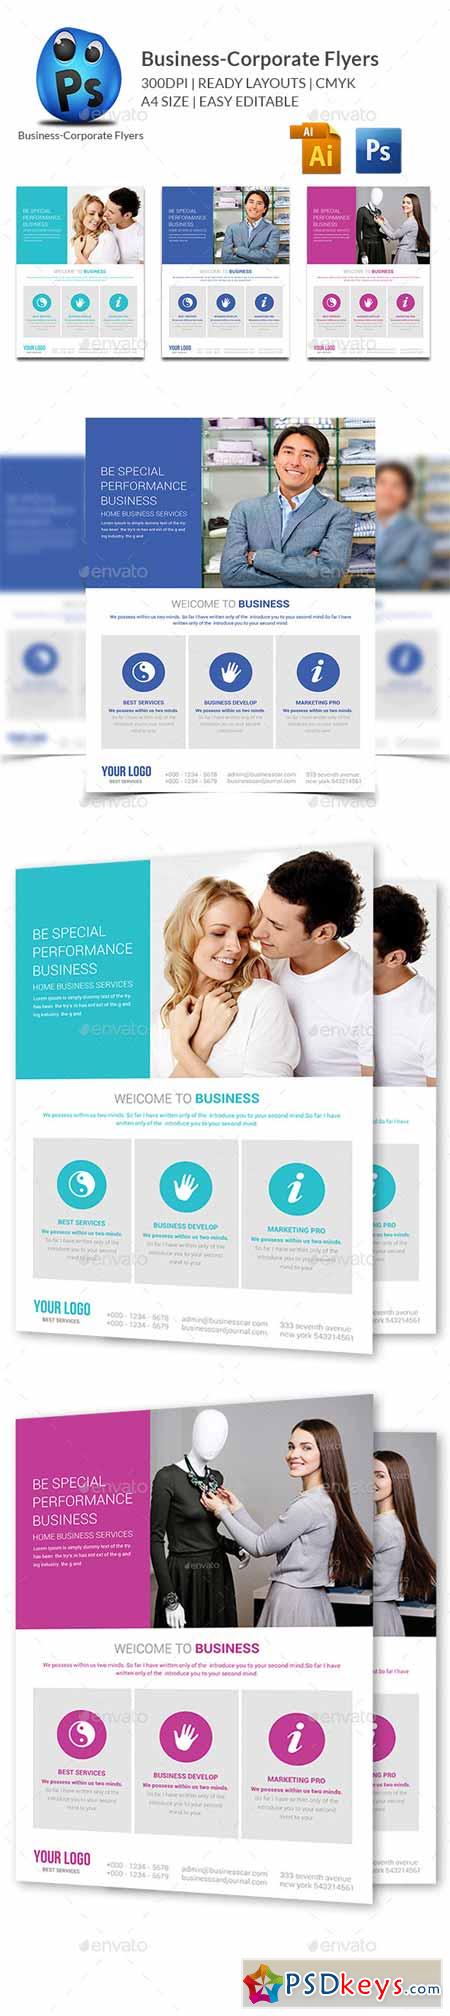 Corporate Business Flyer Template 11006476